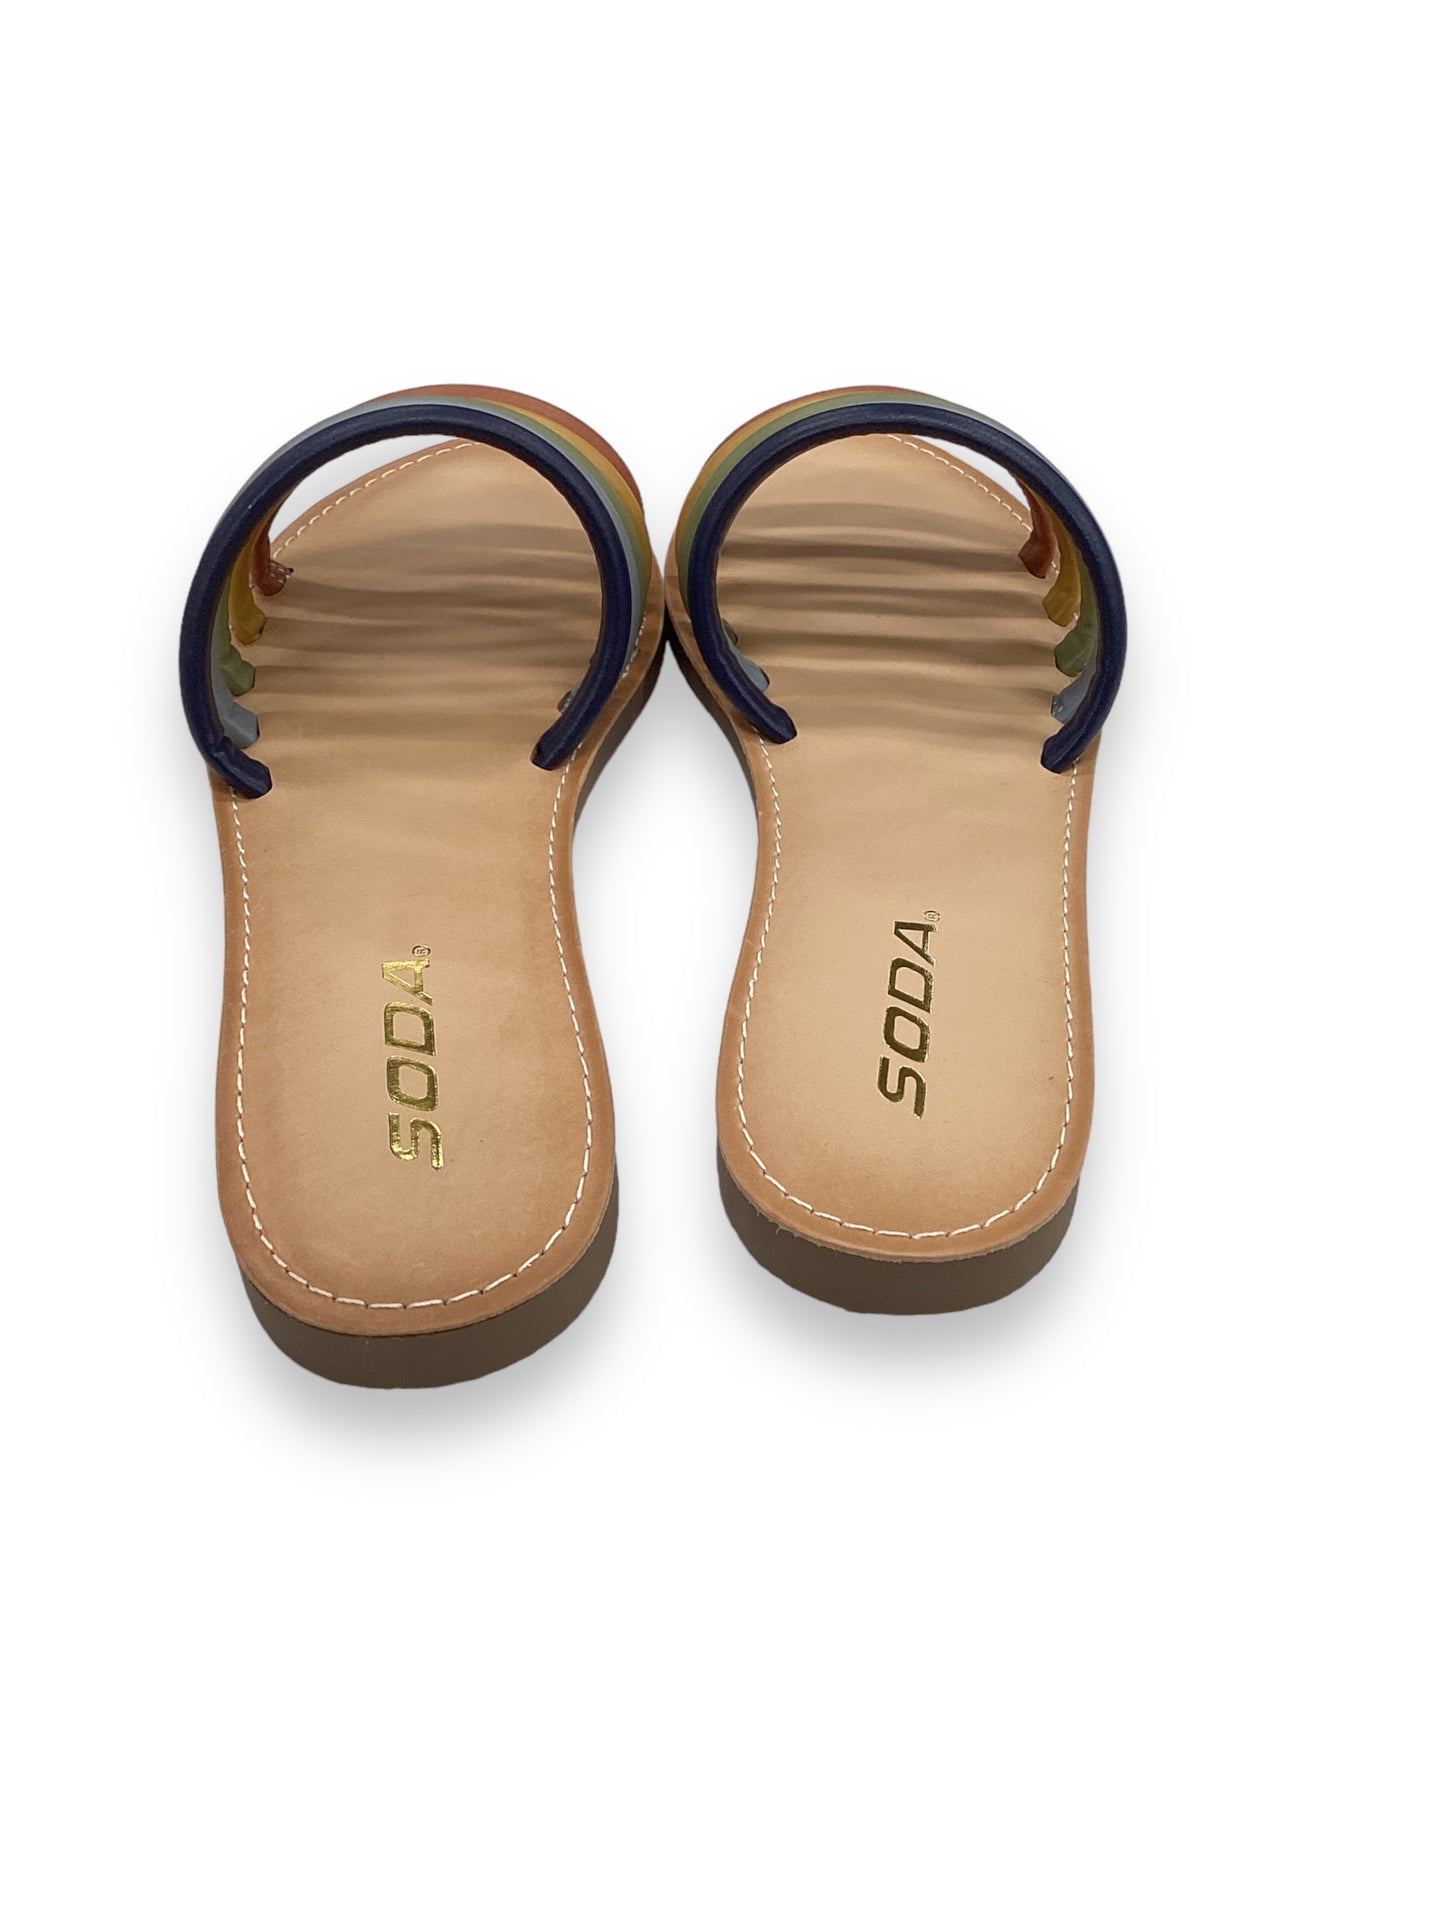 Sandals Flats By Soda  Size: 7